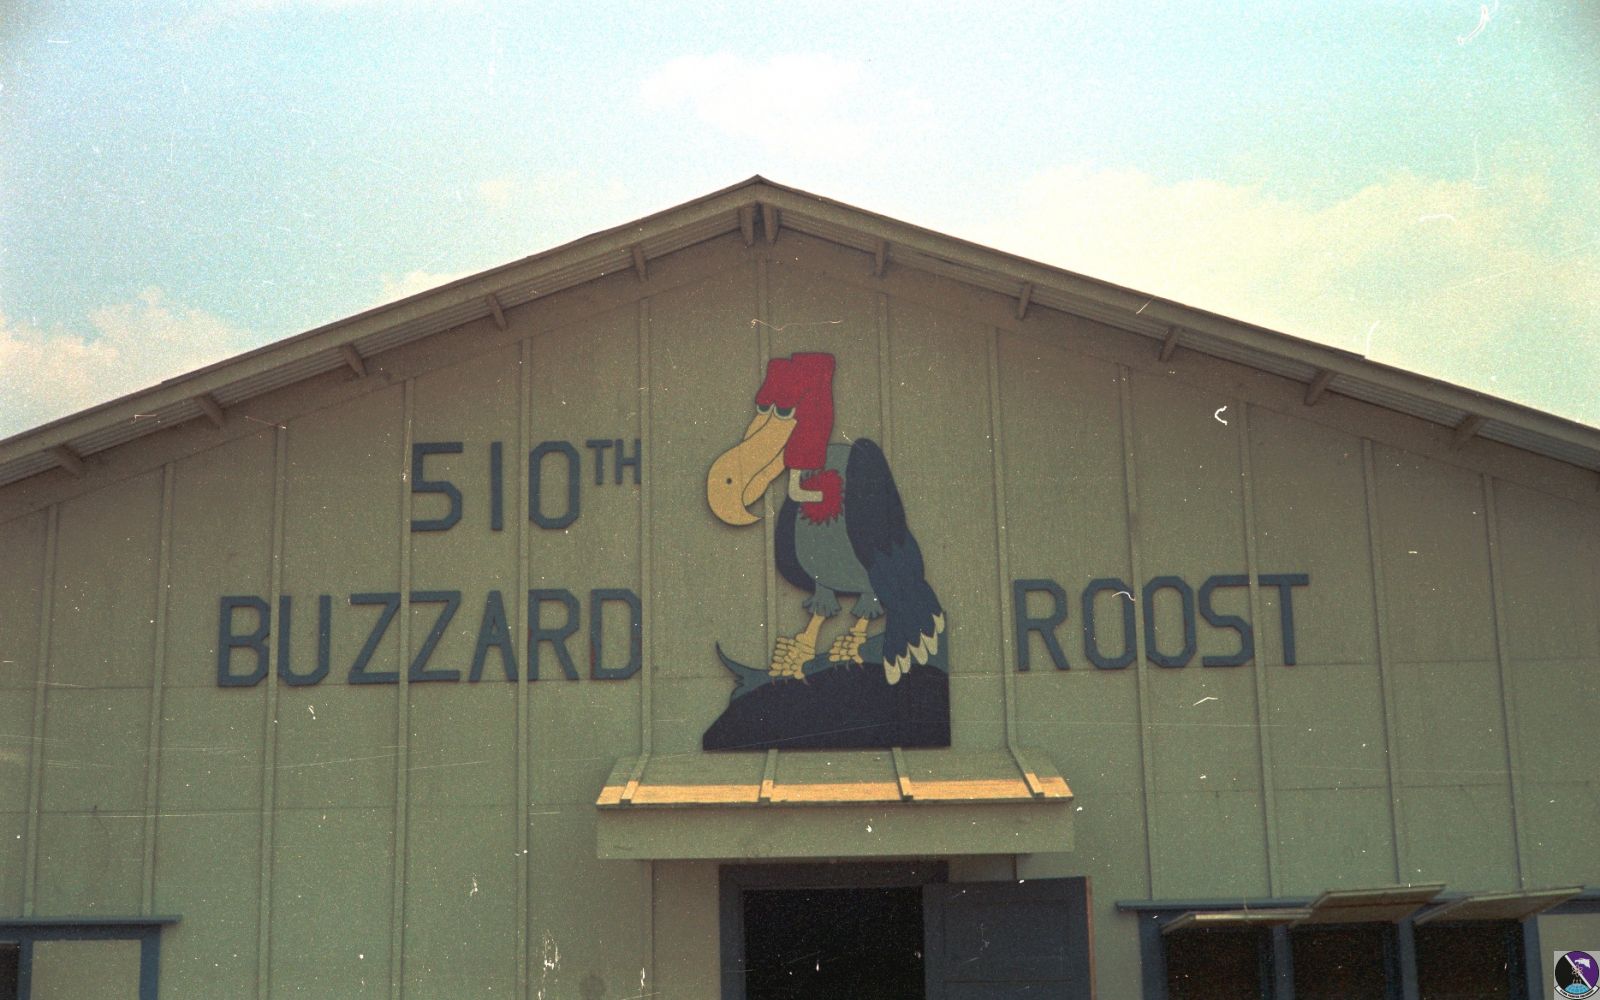 510th buzzards roost